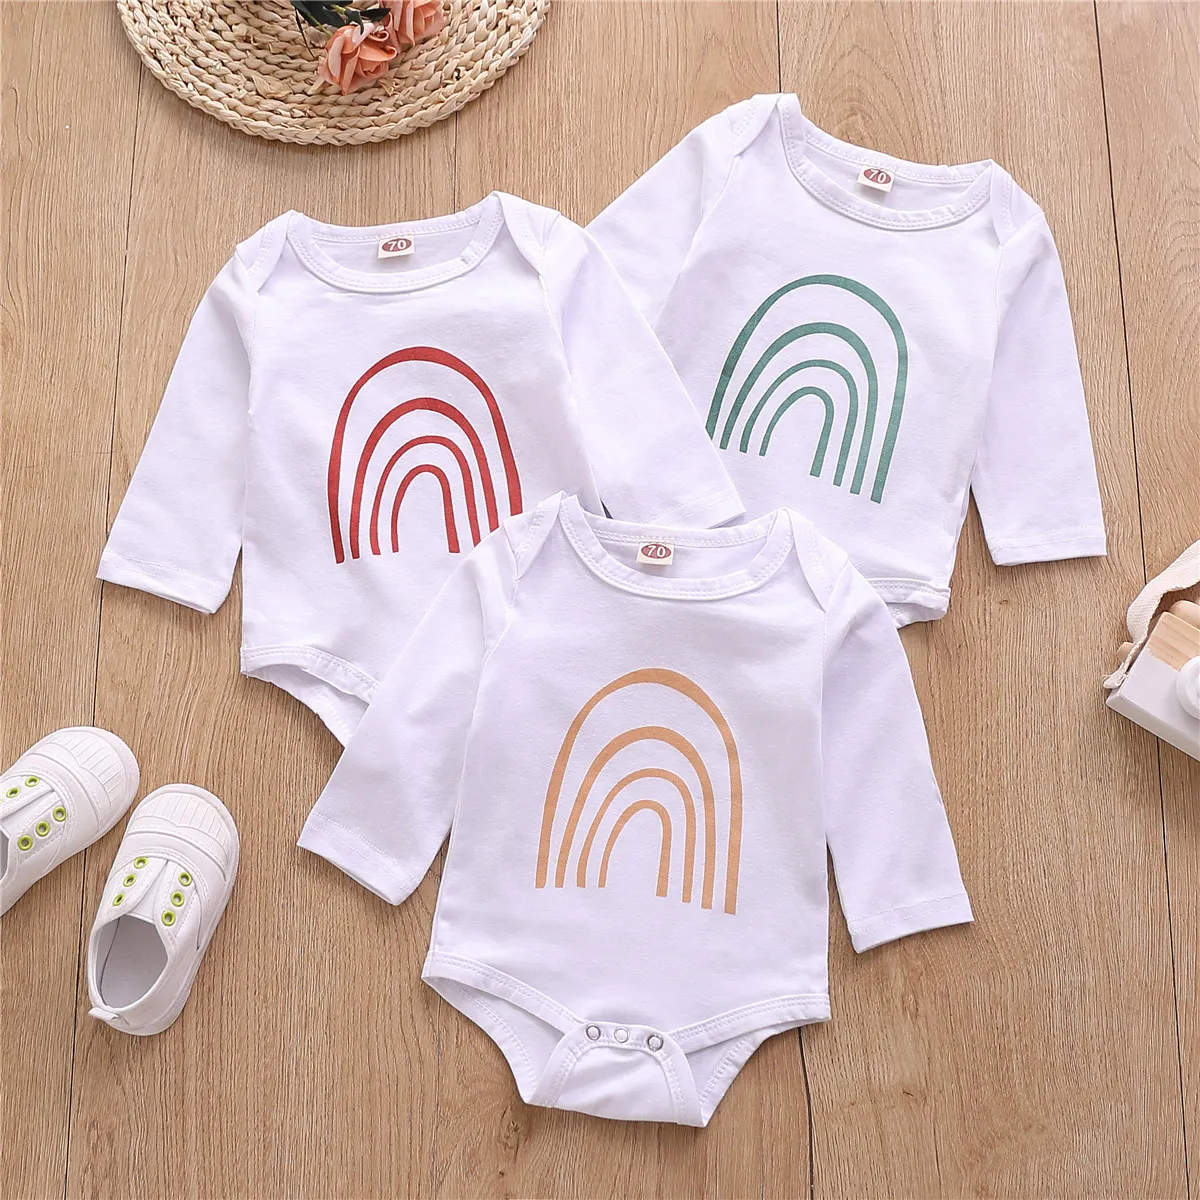 Children Cotton Spring Romper Fashion Kids Rainbow Long Sleeve Jumpsuit Baby Boys Girls Casual Printed Onesie Climb Clothes C6796